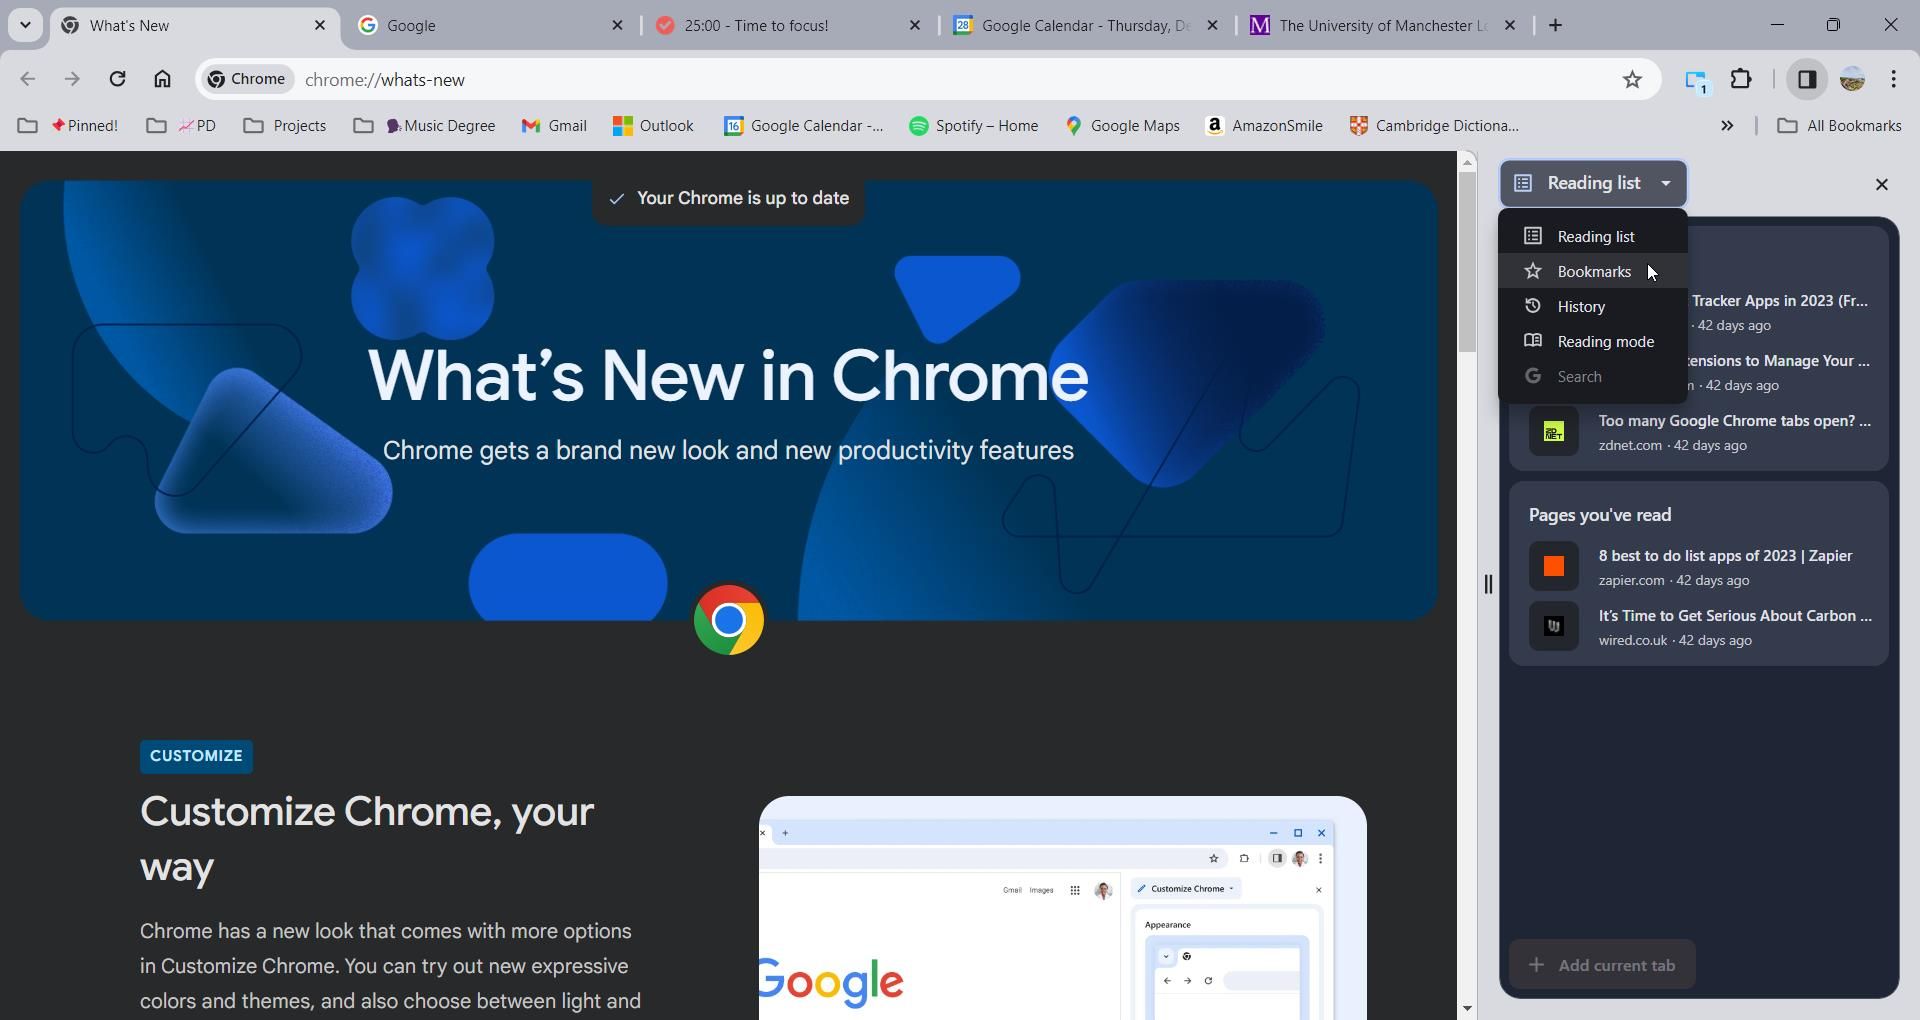 Bookmarks option in Chrome side panel